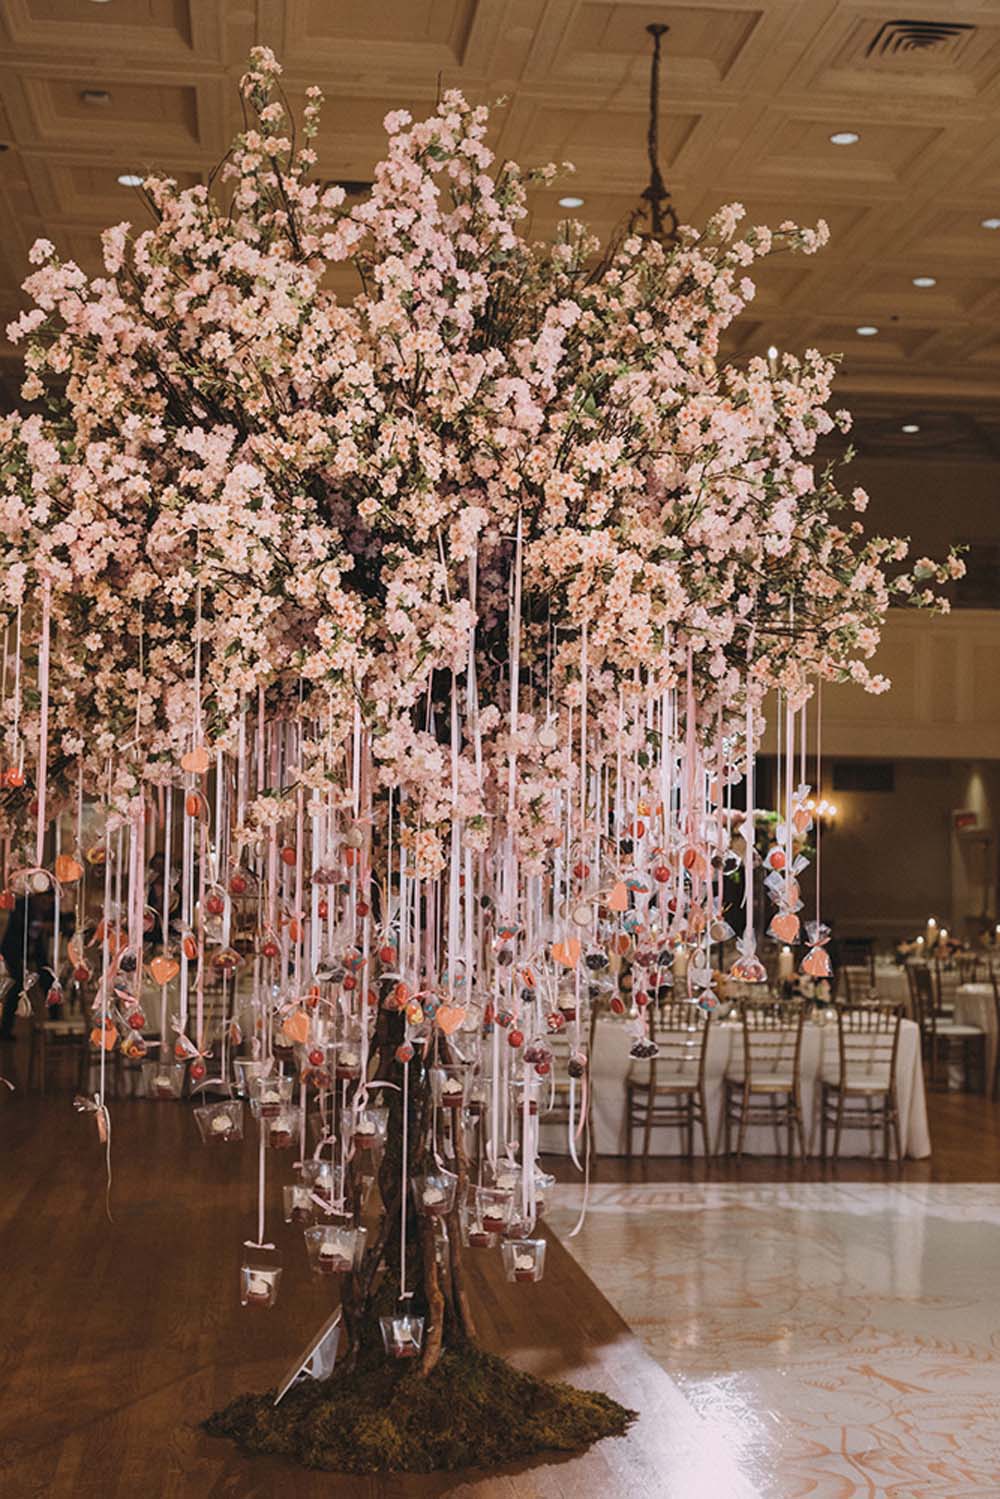 An Elegant Wedding with Cultural Elements - Cherry blossom tree